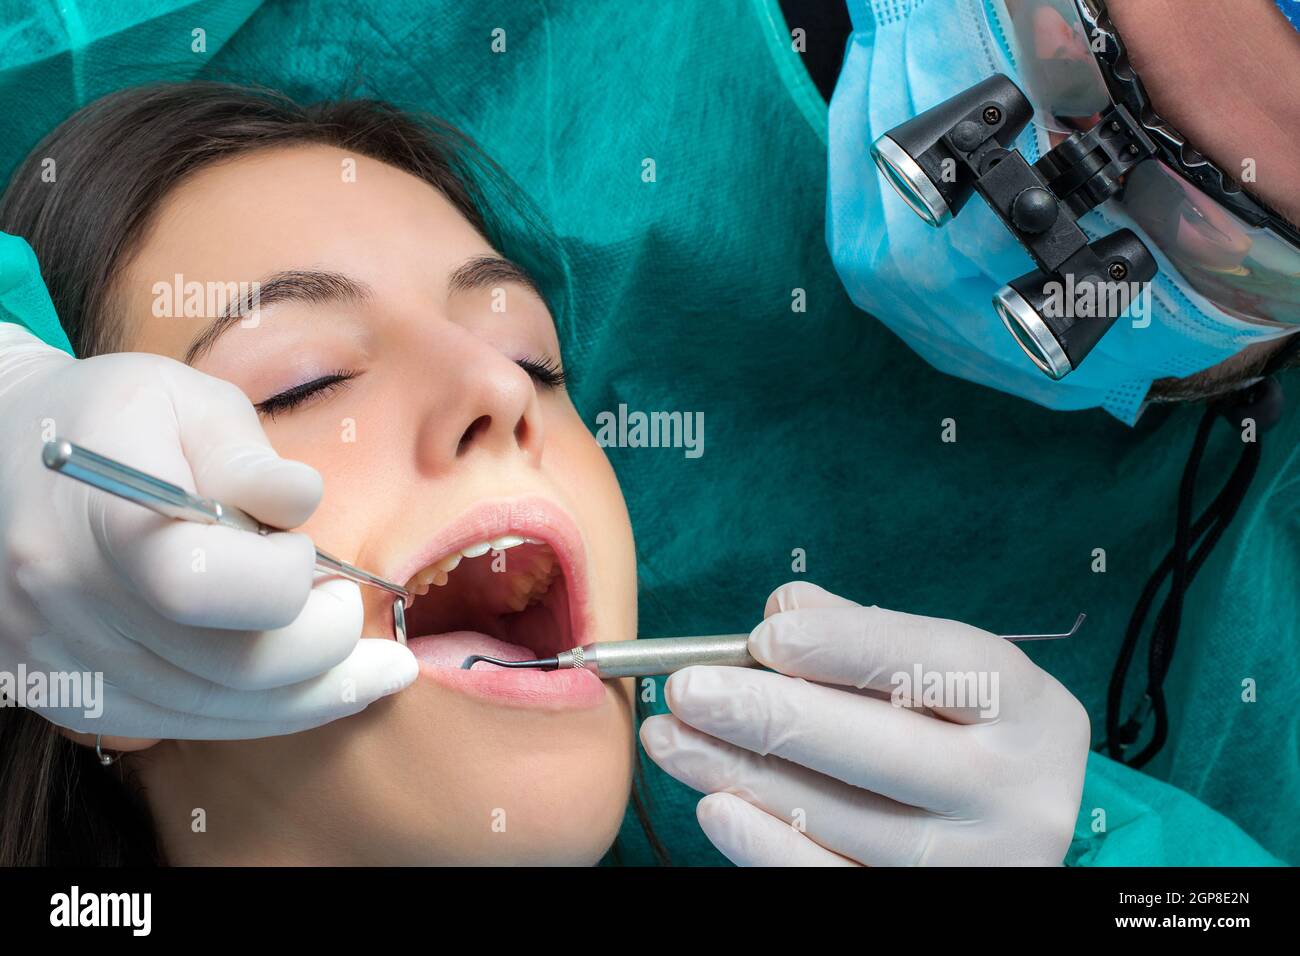 Close up of dentist wearing medical magnifying glasses working on female patient.Surgeon in green gown with mouth mirror and scaler. Stock Photo